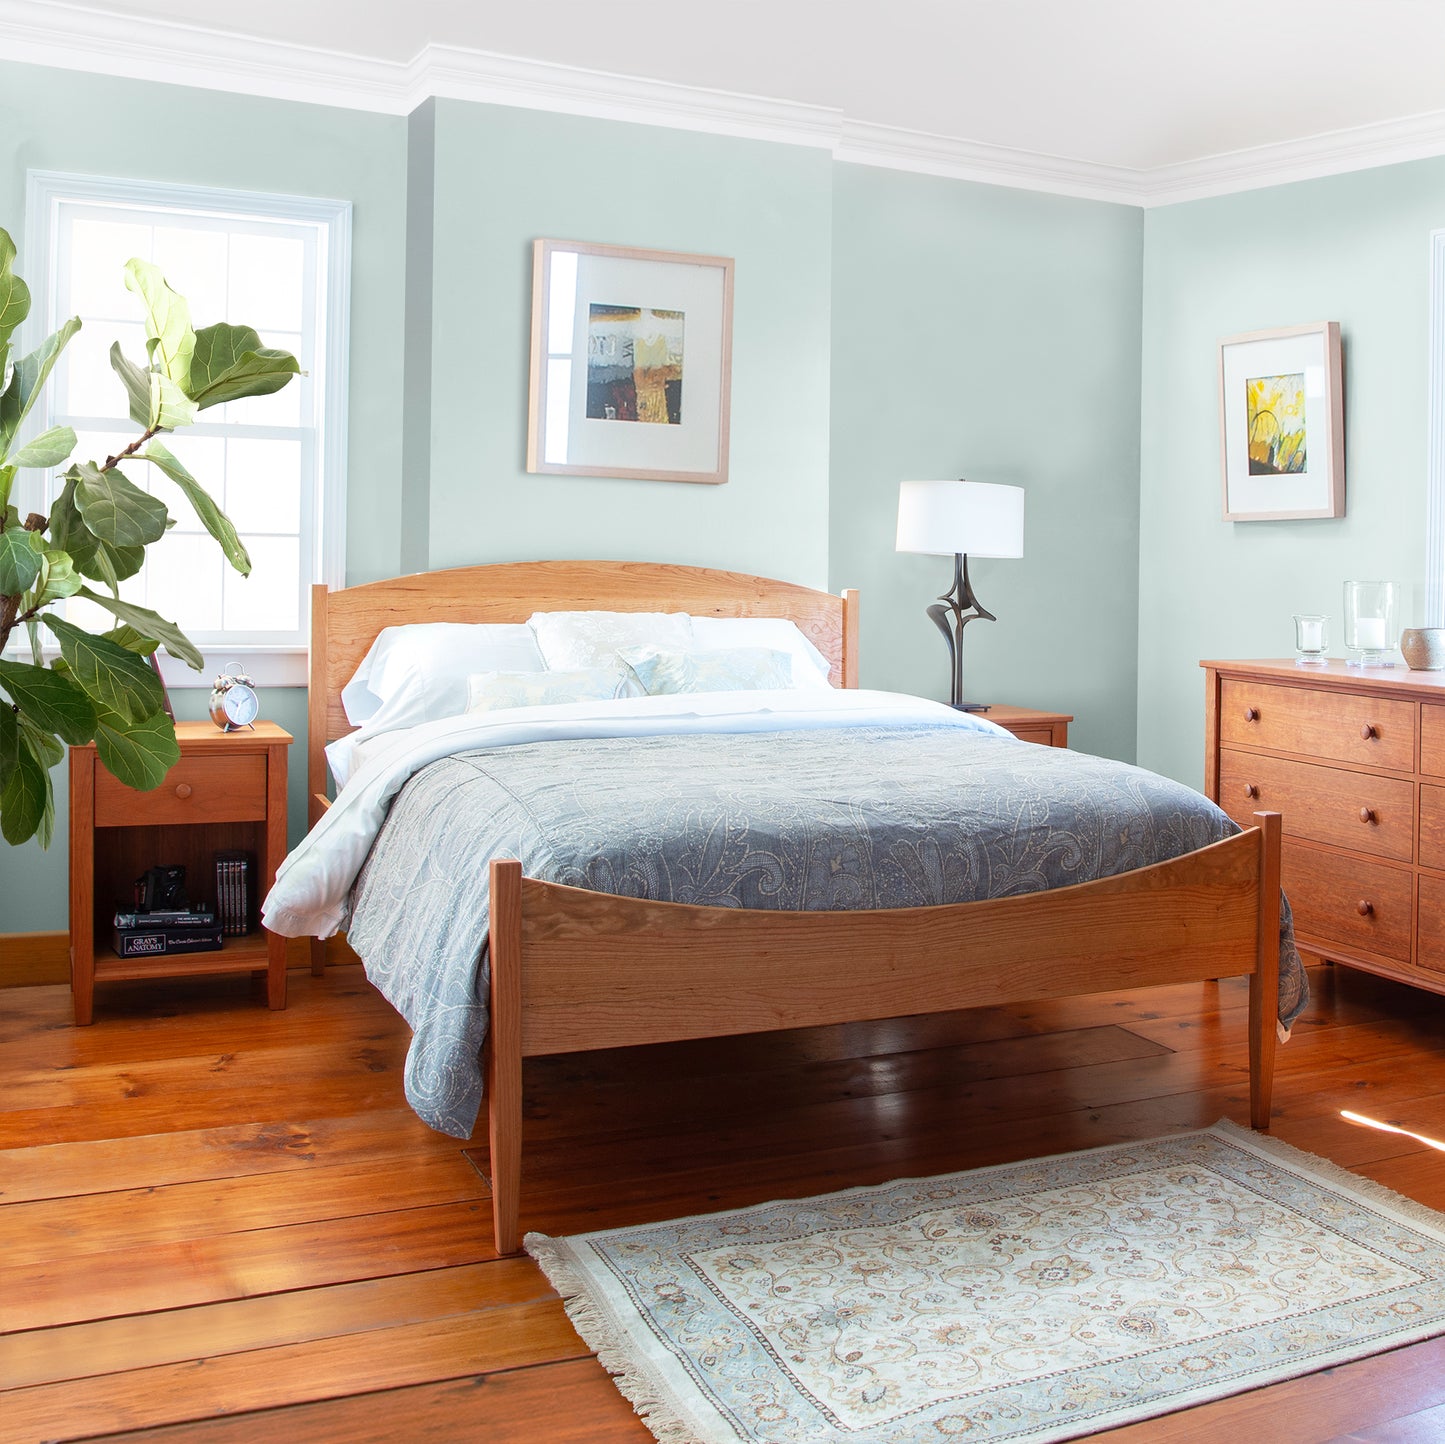 A neatly arranged bedroom with an eco-friendly Maple Corner Woodworks Vermont Shaker Moon Bed, matching dresser, and bedside table, light blue walls, hardwood floor, and a large leafy plant in the corner. Decor includes a